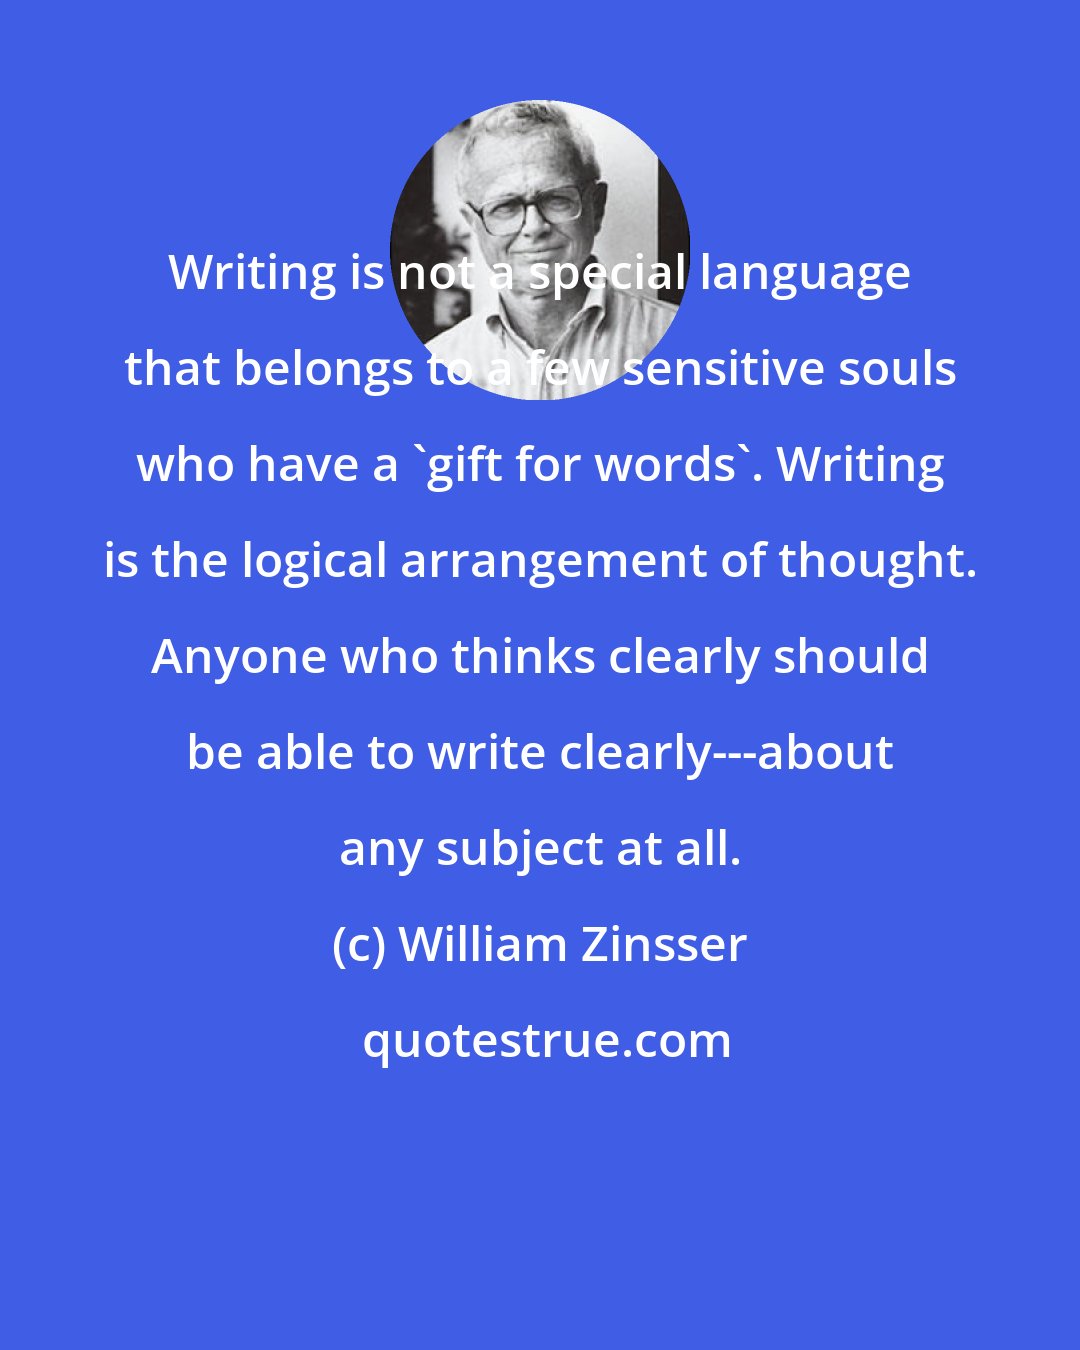 William Zinsser: Writing is not a special language that belongs to a few sensitive souls who have a 'gift for words'. Writing is the logical arrangement of thought. Anyone who thinks clearly should be able to write clearly---about any subject at all.